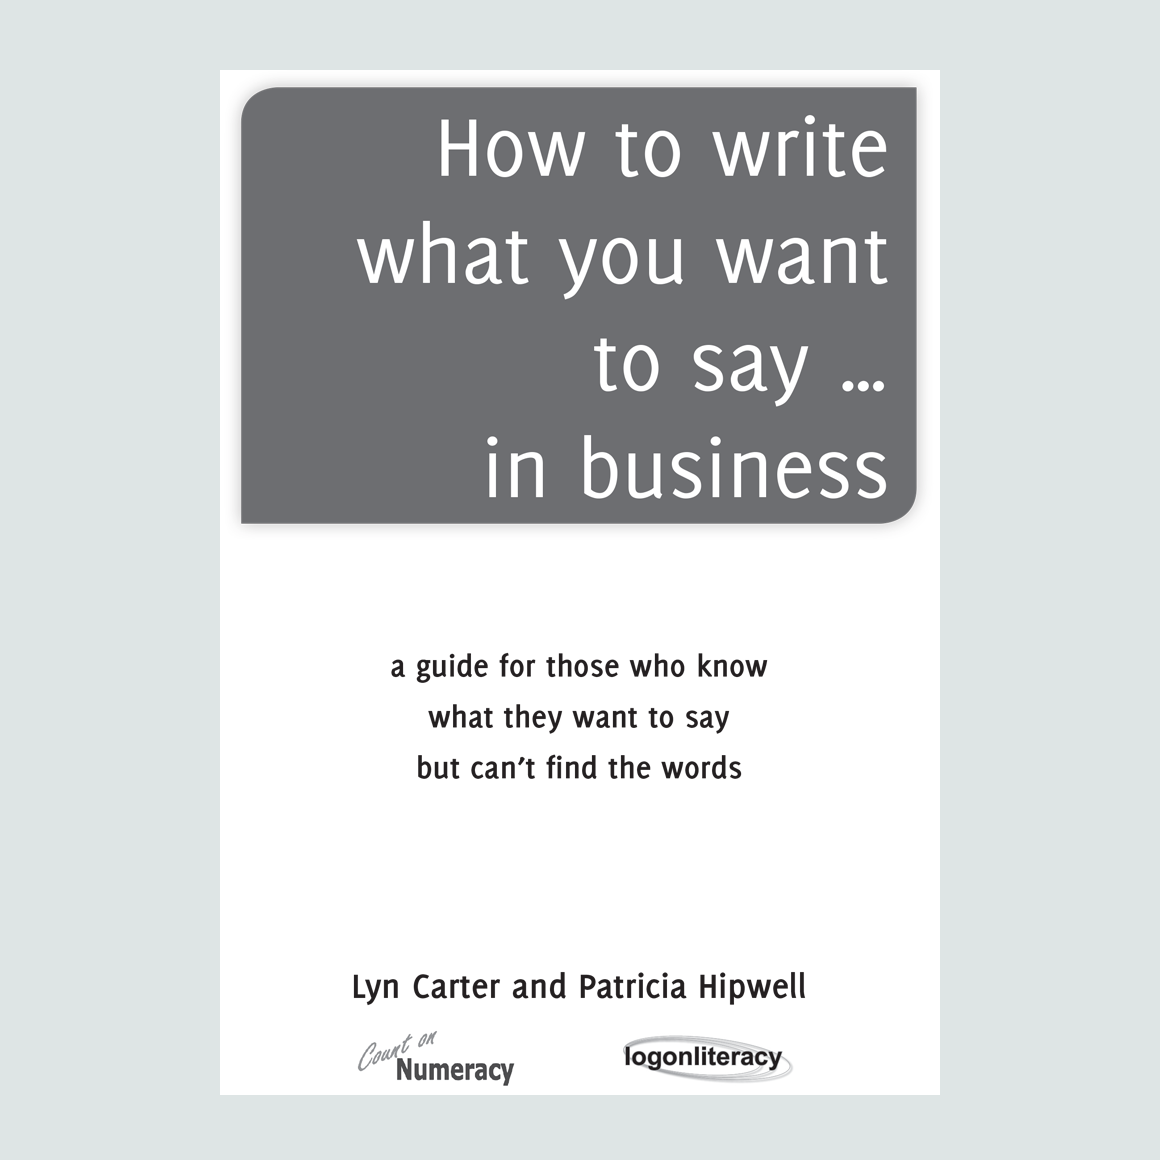 How to write what you want to say... in business